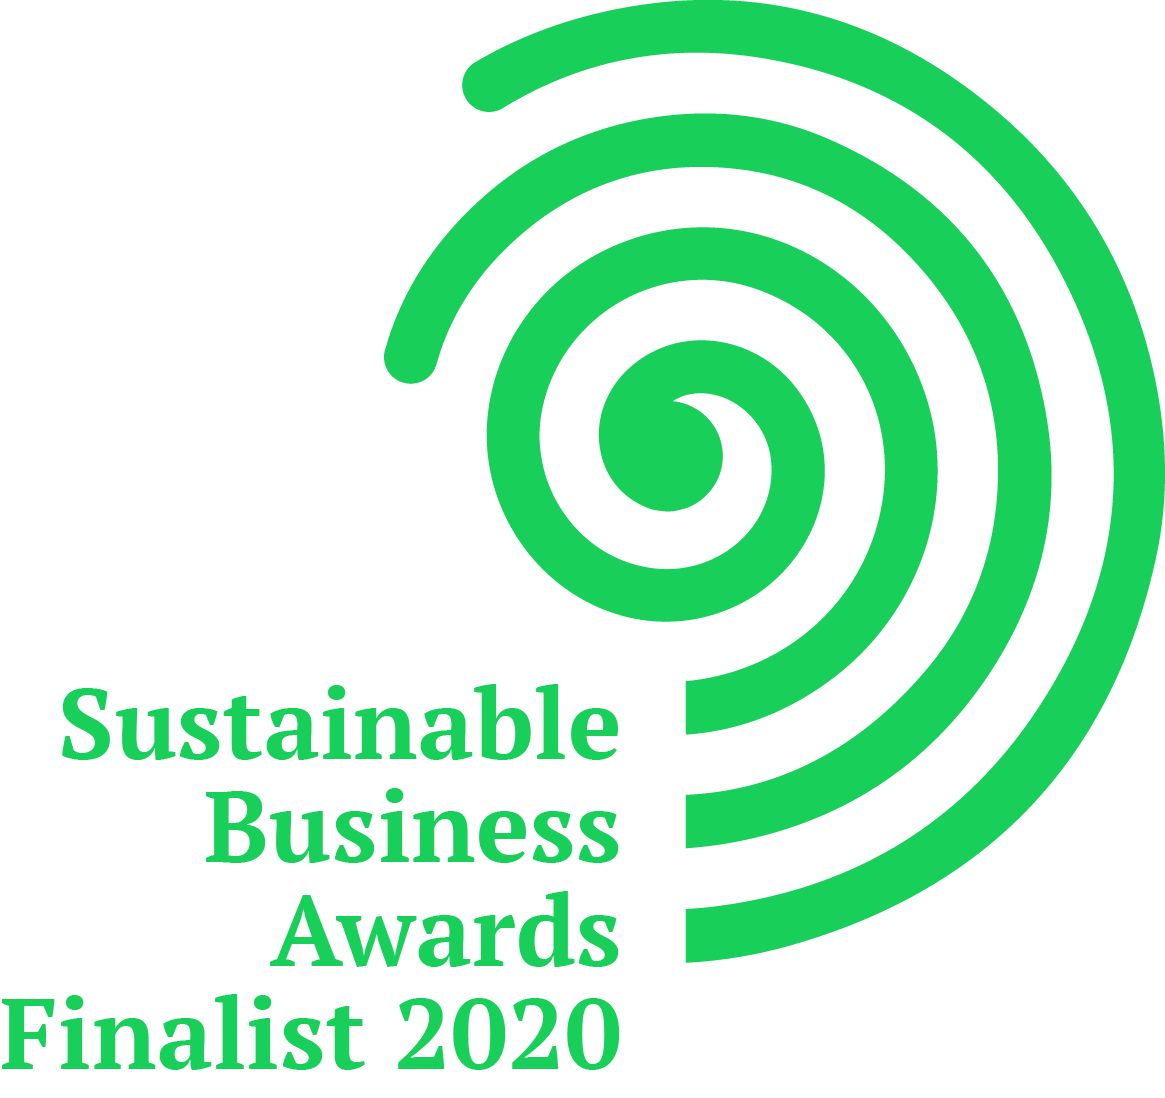 Reemi period underwear were a finalist for the Sustainable Business Awards 2020